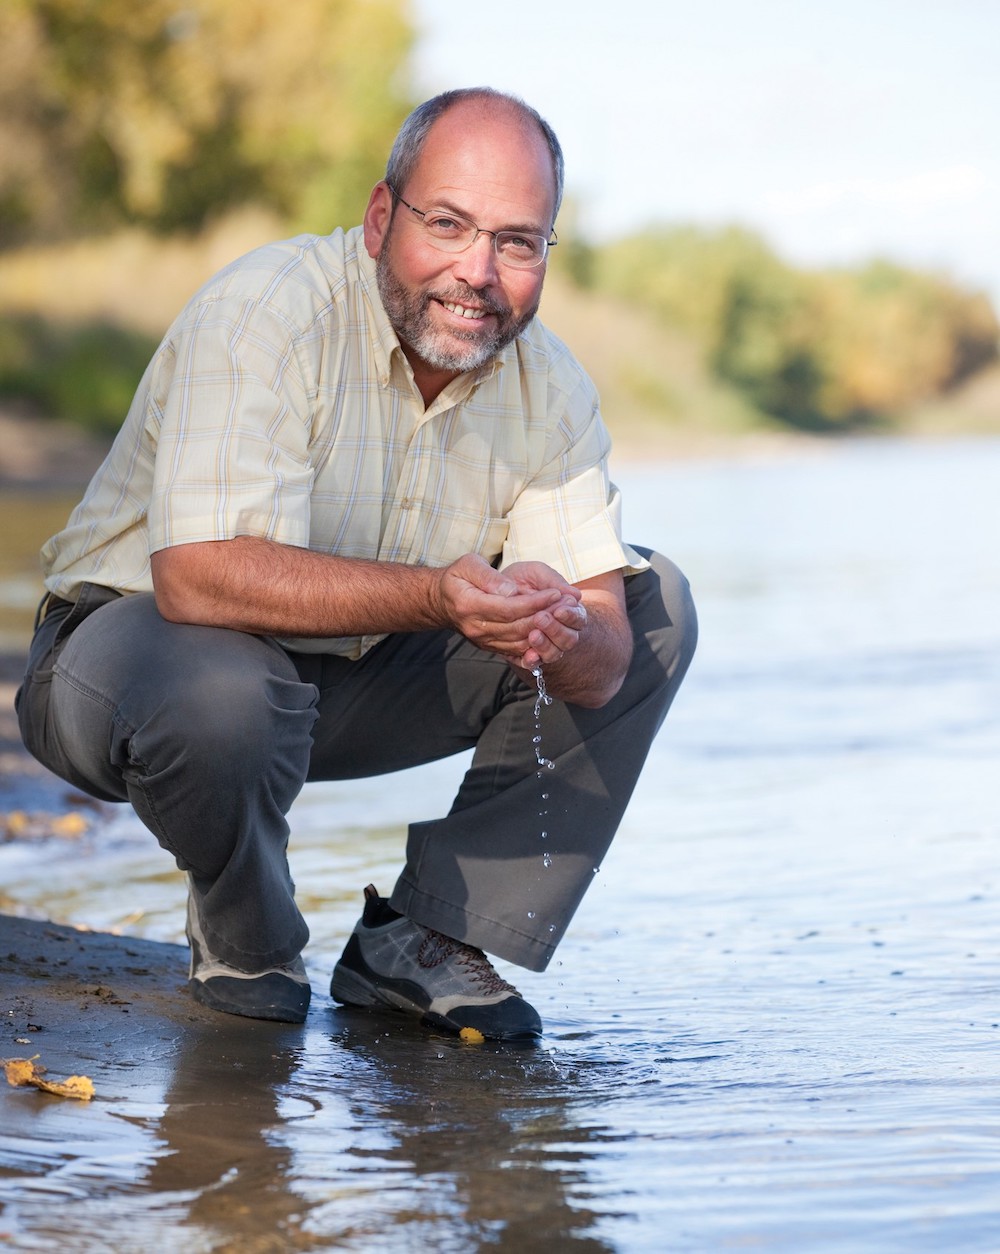 A light-skinned man with grey thinning hair, wearing an off-white shirt and grey pants, crouches on the bank of a river. Has palms are cupped together and water dribbles from them.